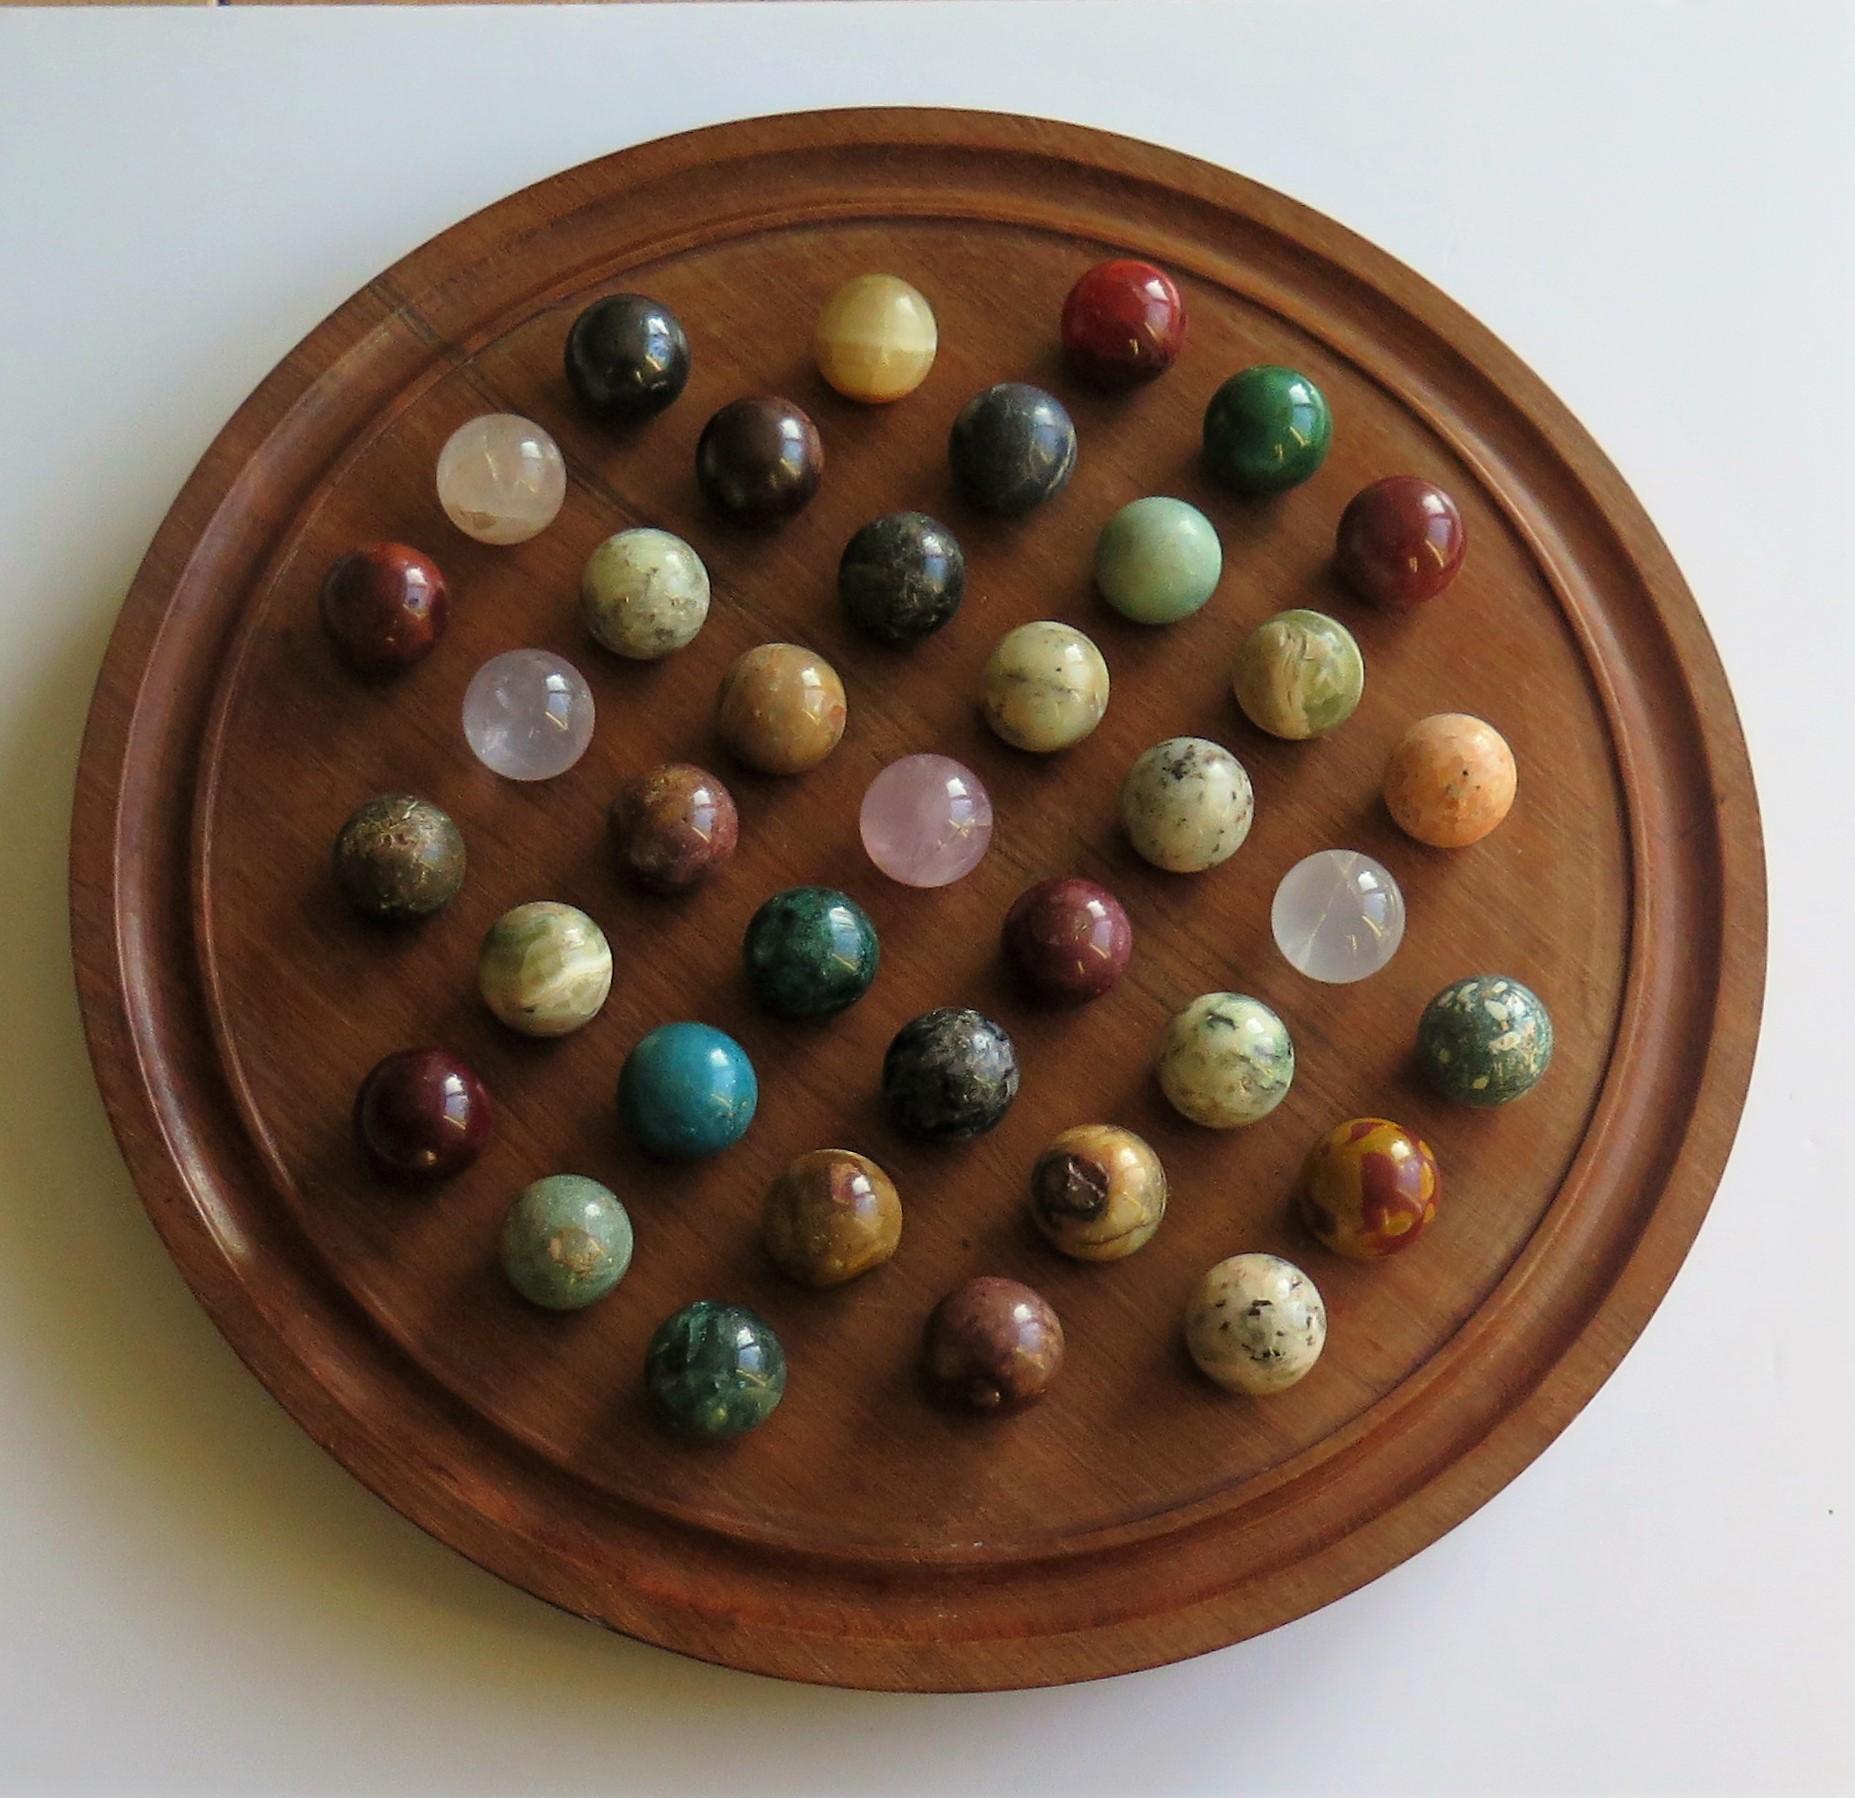 20th Century Large Marble Table Solitaire Game with 37 Mineral Stone Marbles, circa 1920